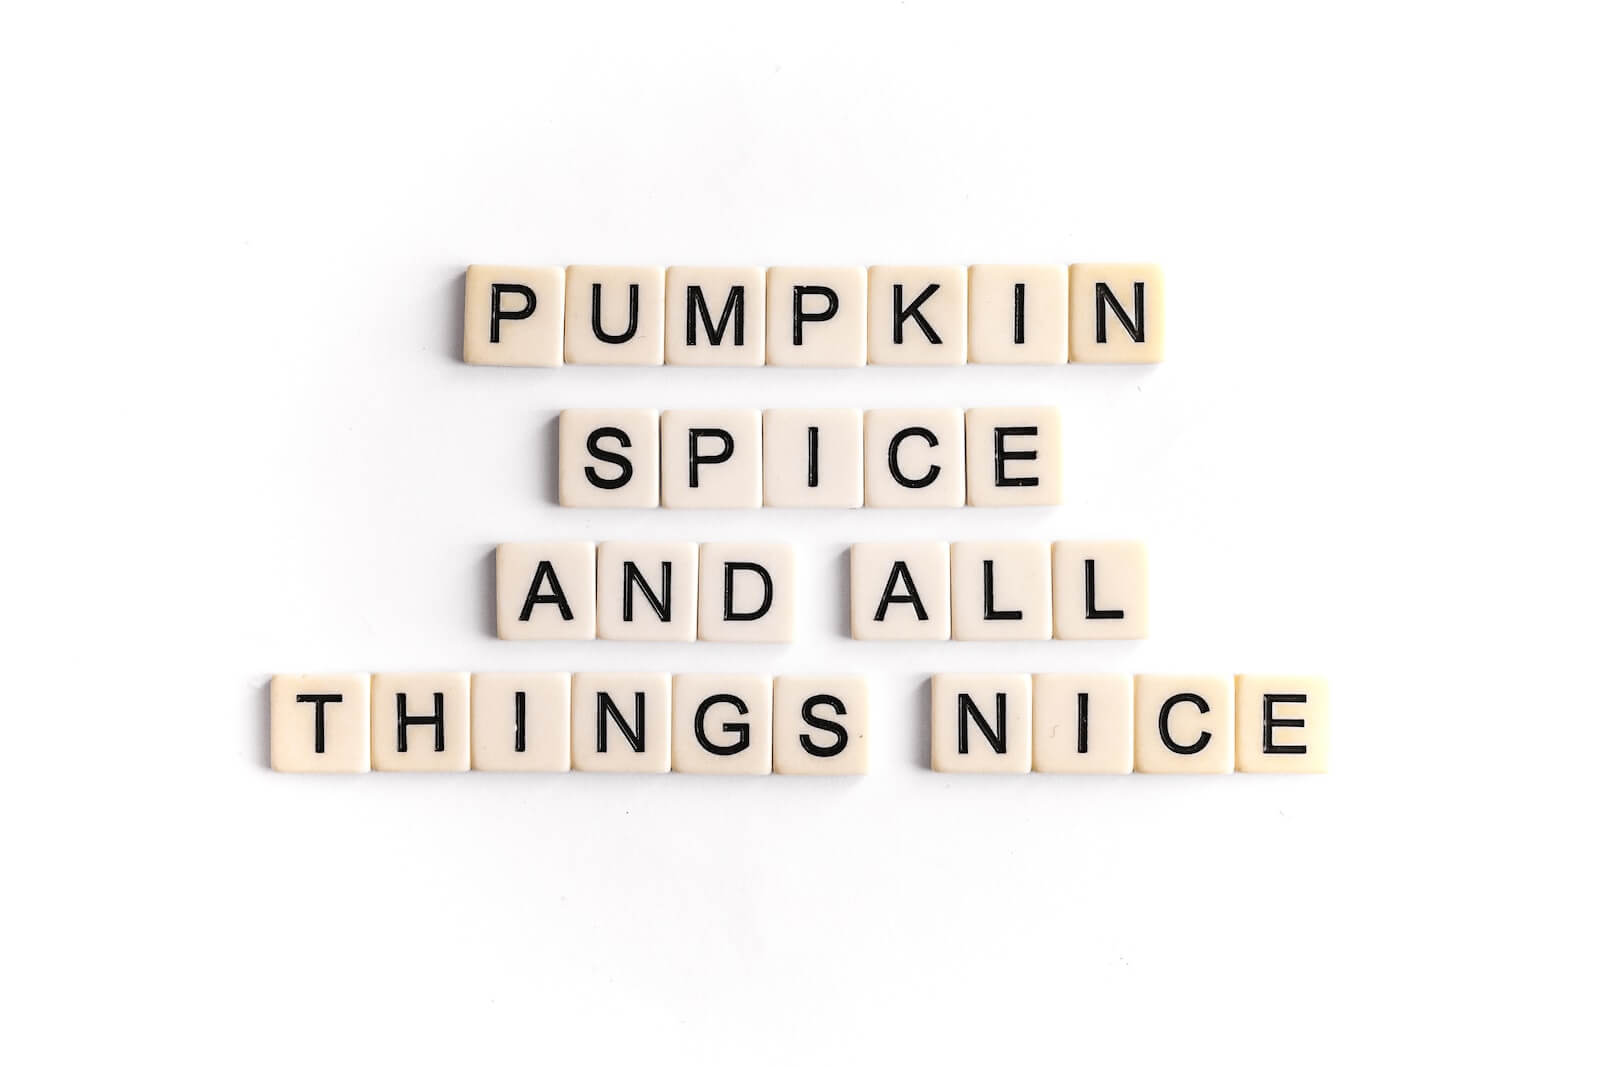 "Pumpkin Spice and All Things Nice"